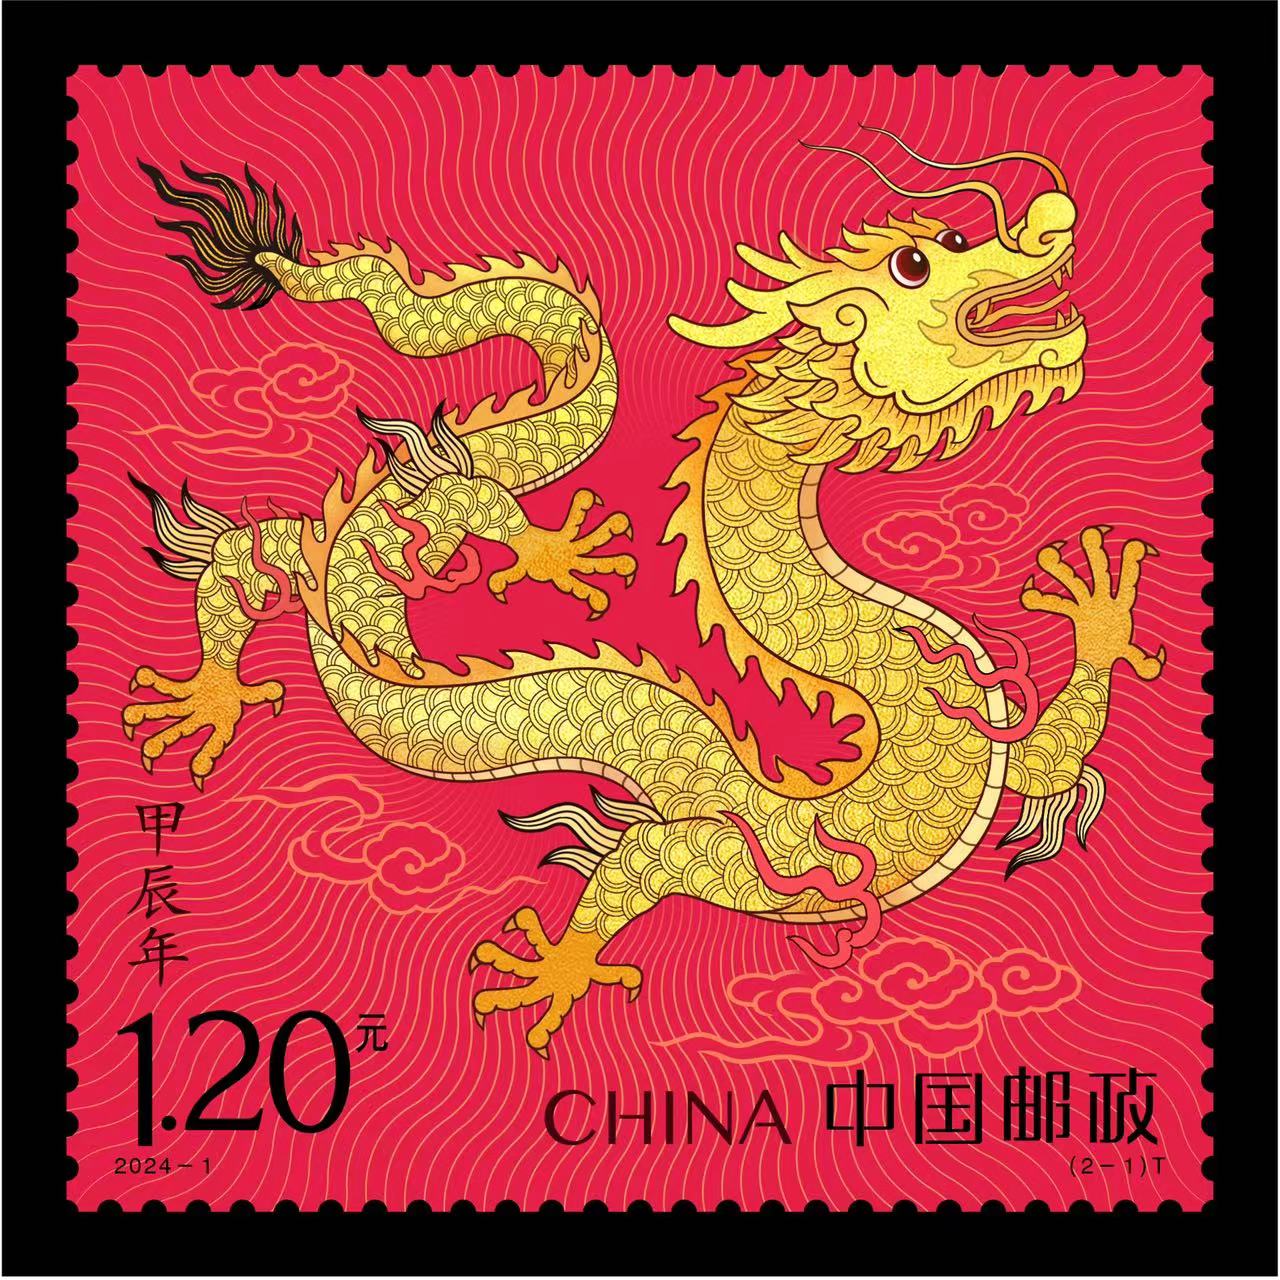 Stamps marking the Chinese zodiac Year of the Dragon first 